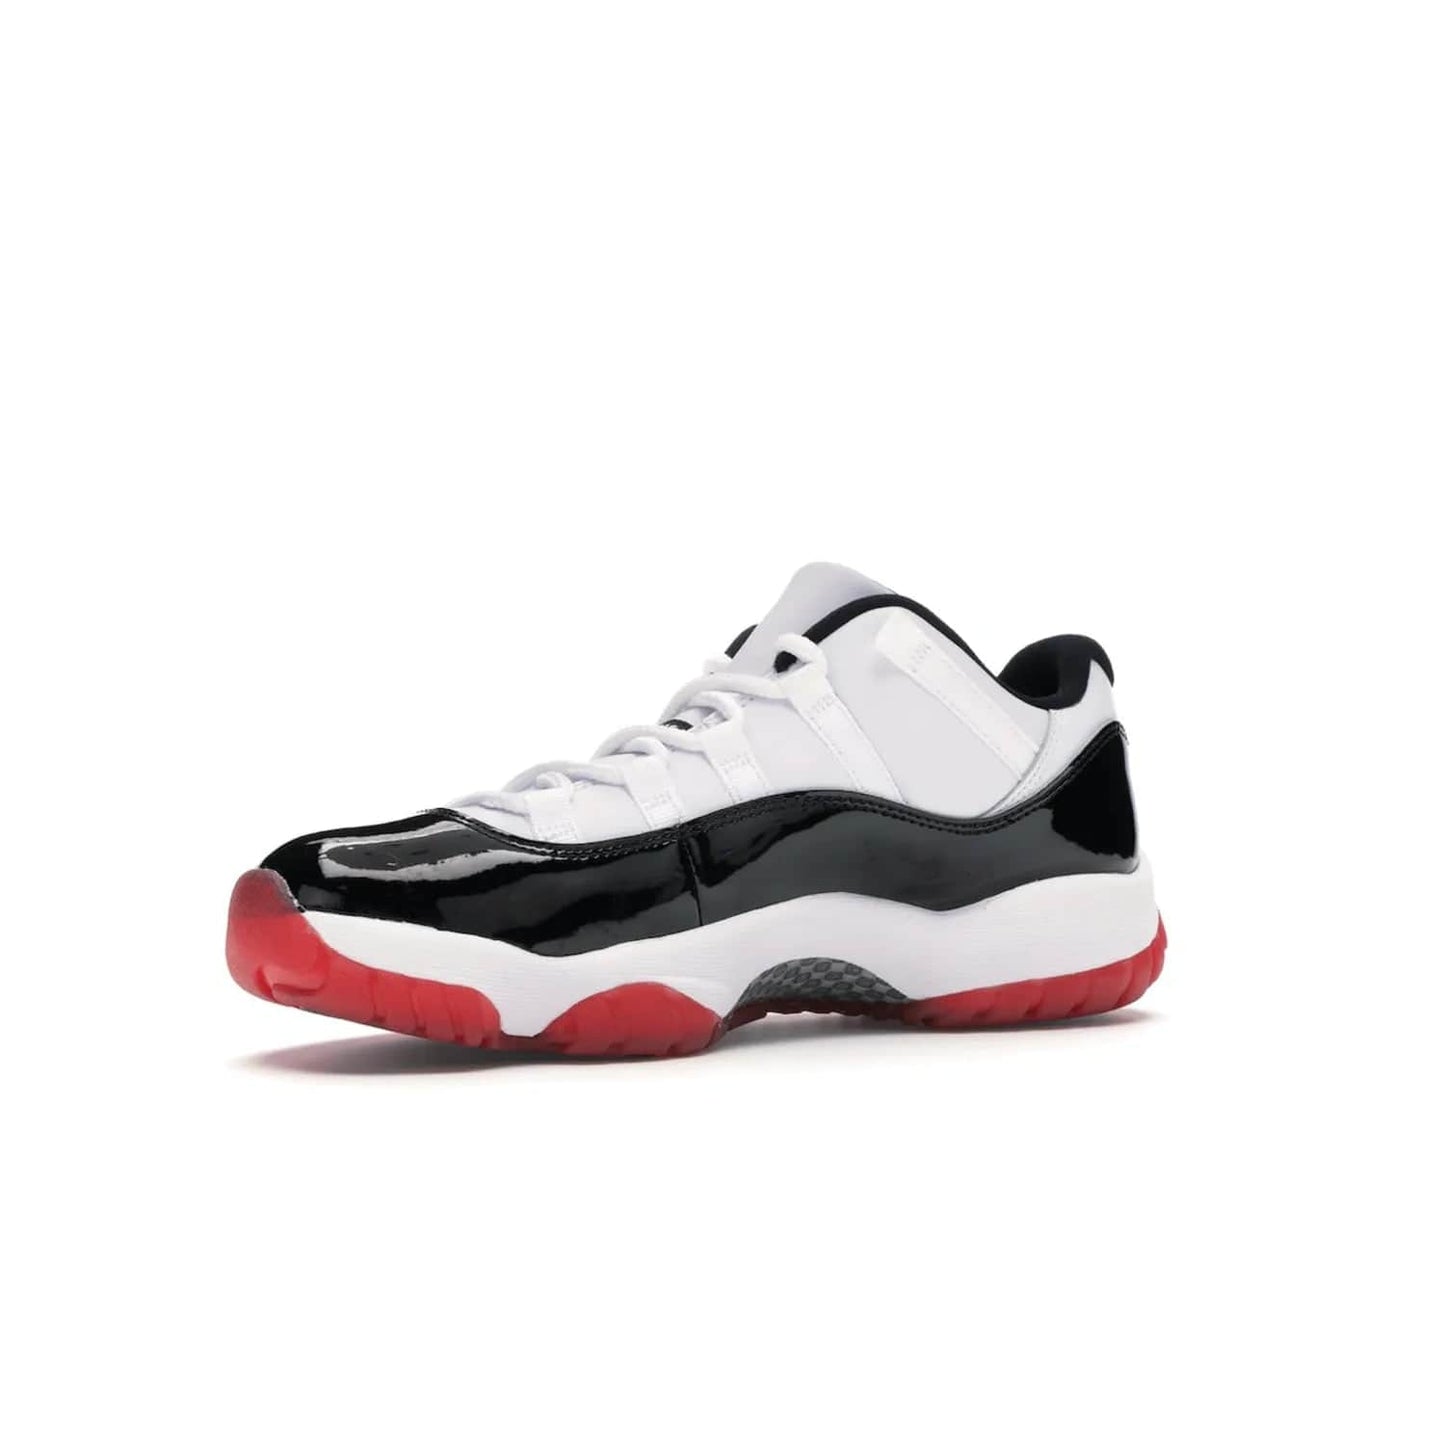 Jordan 11 Retro Low Concord Bred - Image 16 - Only at www.BallersClubKickz.com - Grab the classic Jordan 11 look with the Jordan 11 Retro Low Concord Bred. With white and black elements and the iconic red outsole of the Jordan 11 Bred, you won't miss a beat. Released in June 2020, the perfect complement to any outfit.